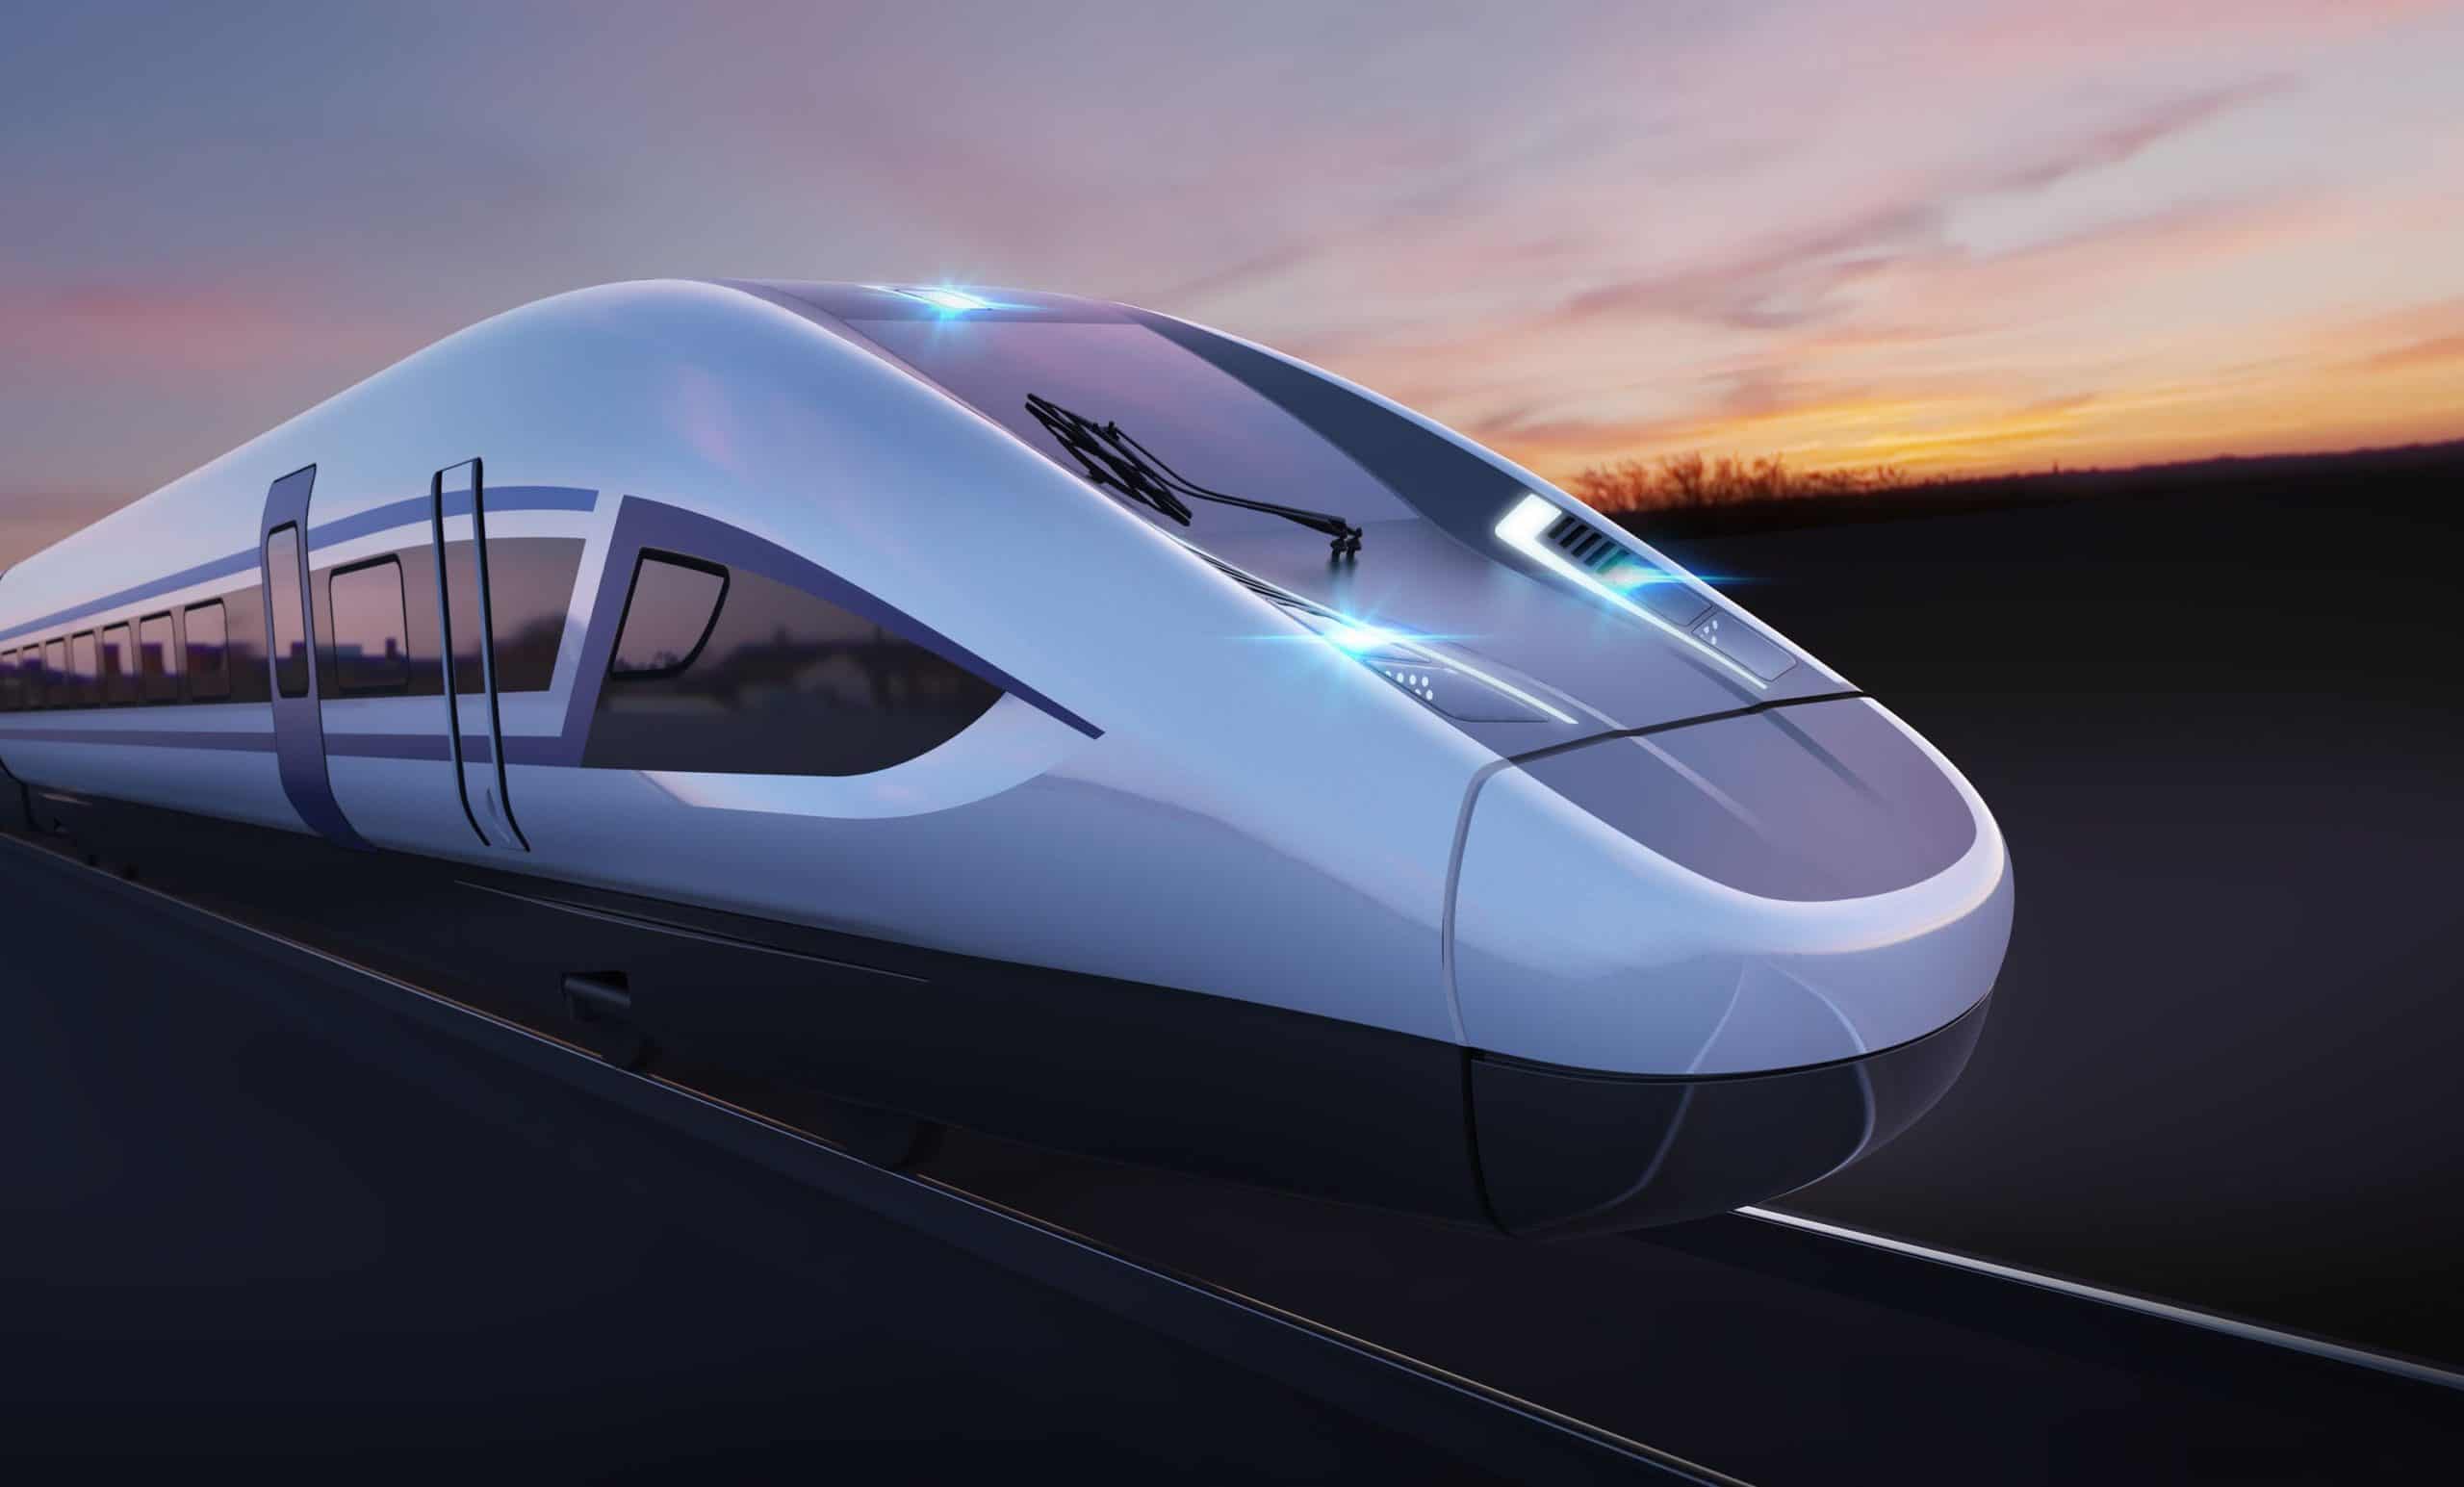 Labour ‘will resurrect northern leg of HS2’ – reports